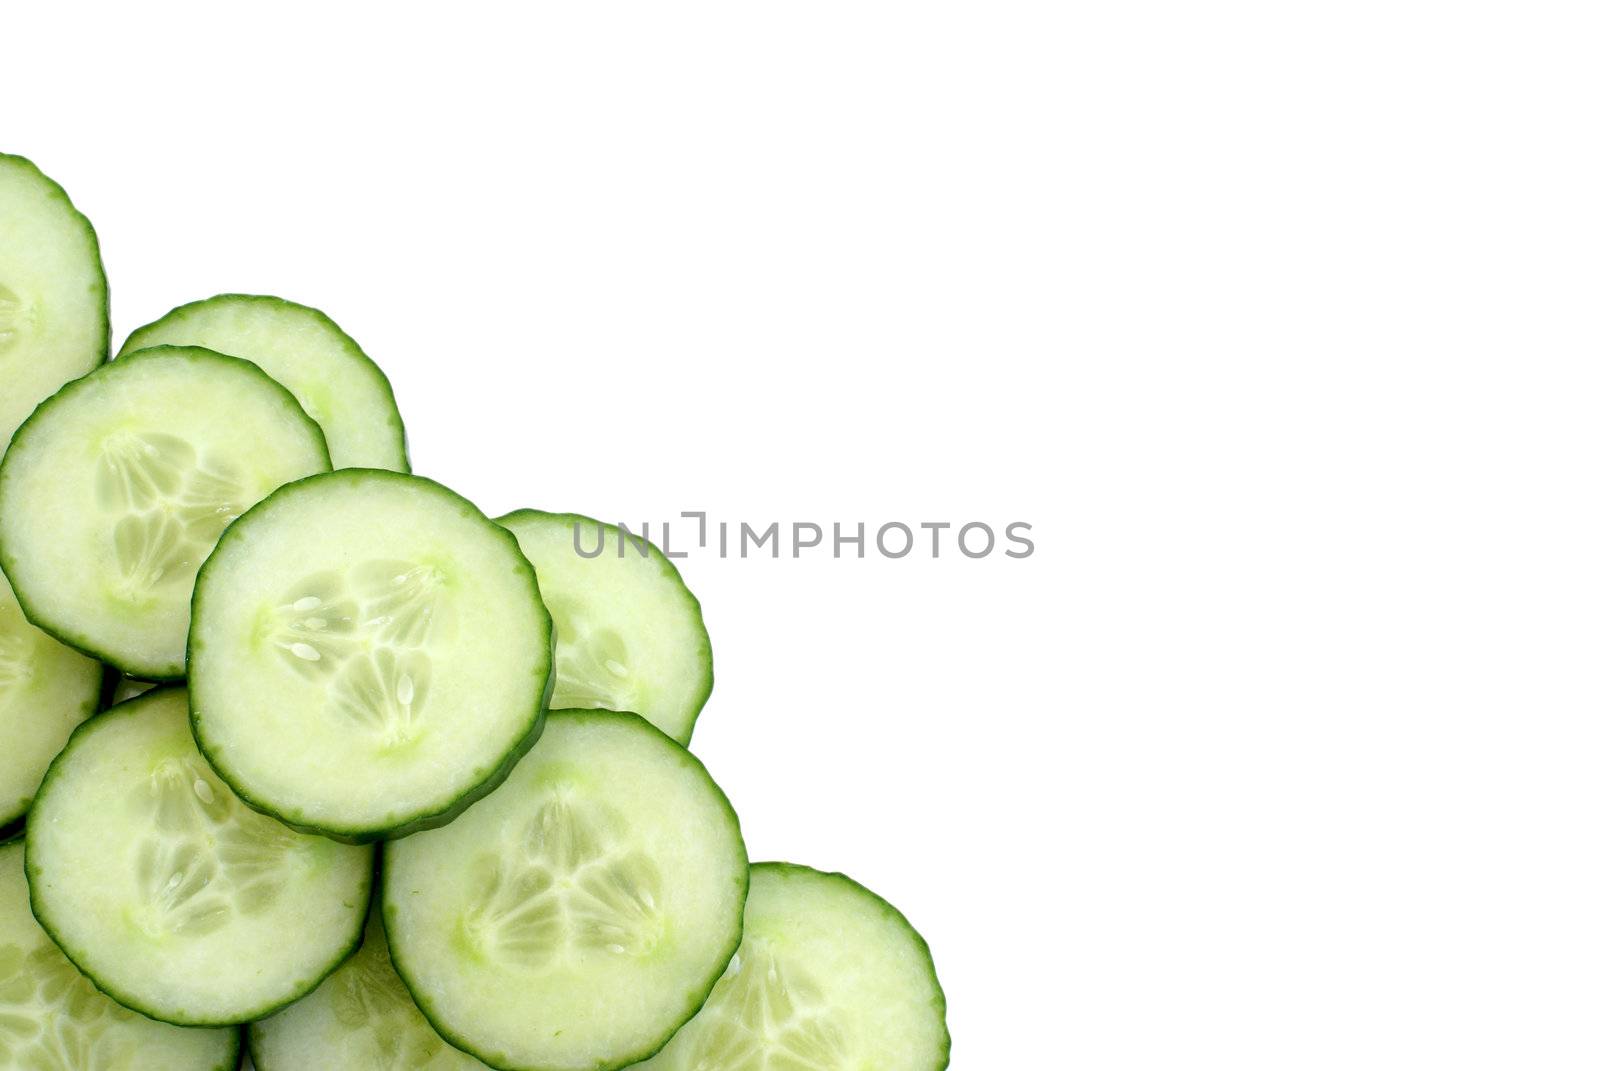 Many cucumber slices at the bottom left of the frame, leaving room for copy-space.